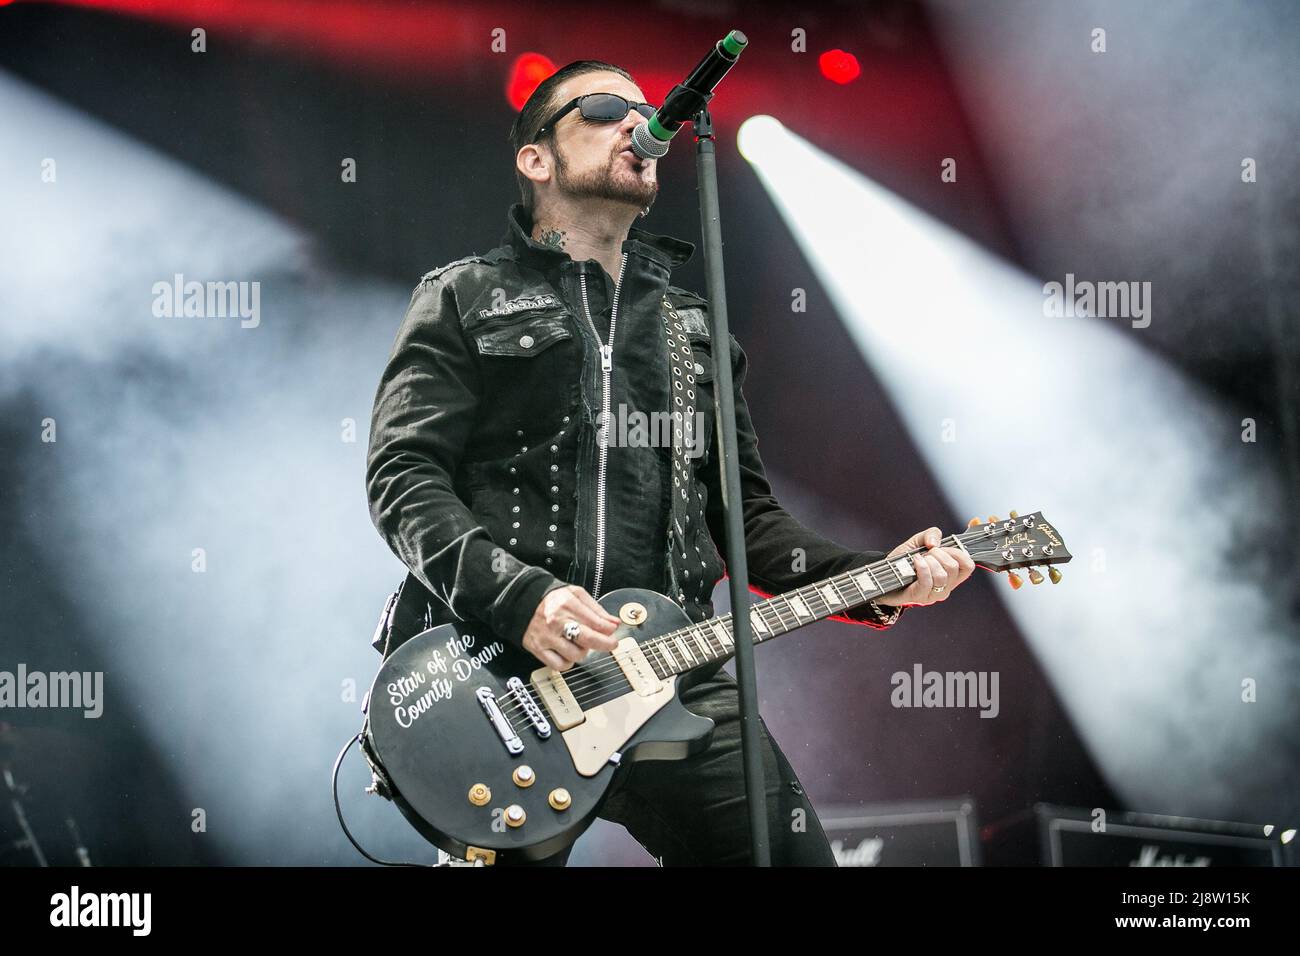 Belfast rockstar Ricky Warwick of Black Star Riders and Thin Lizzy performing live on stage Stock Photo